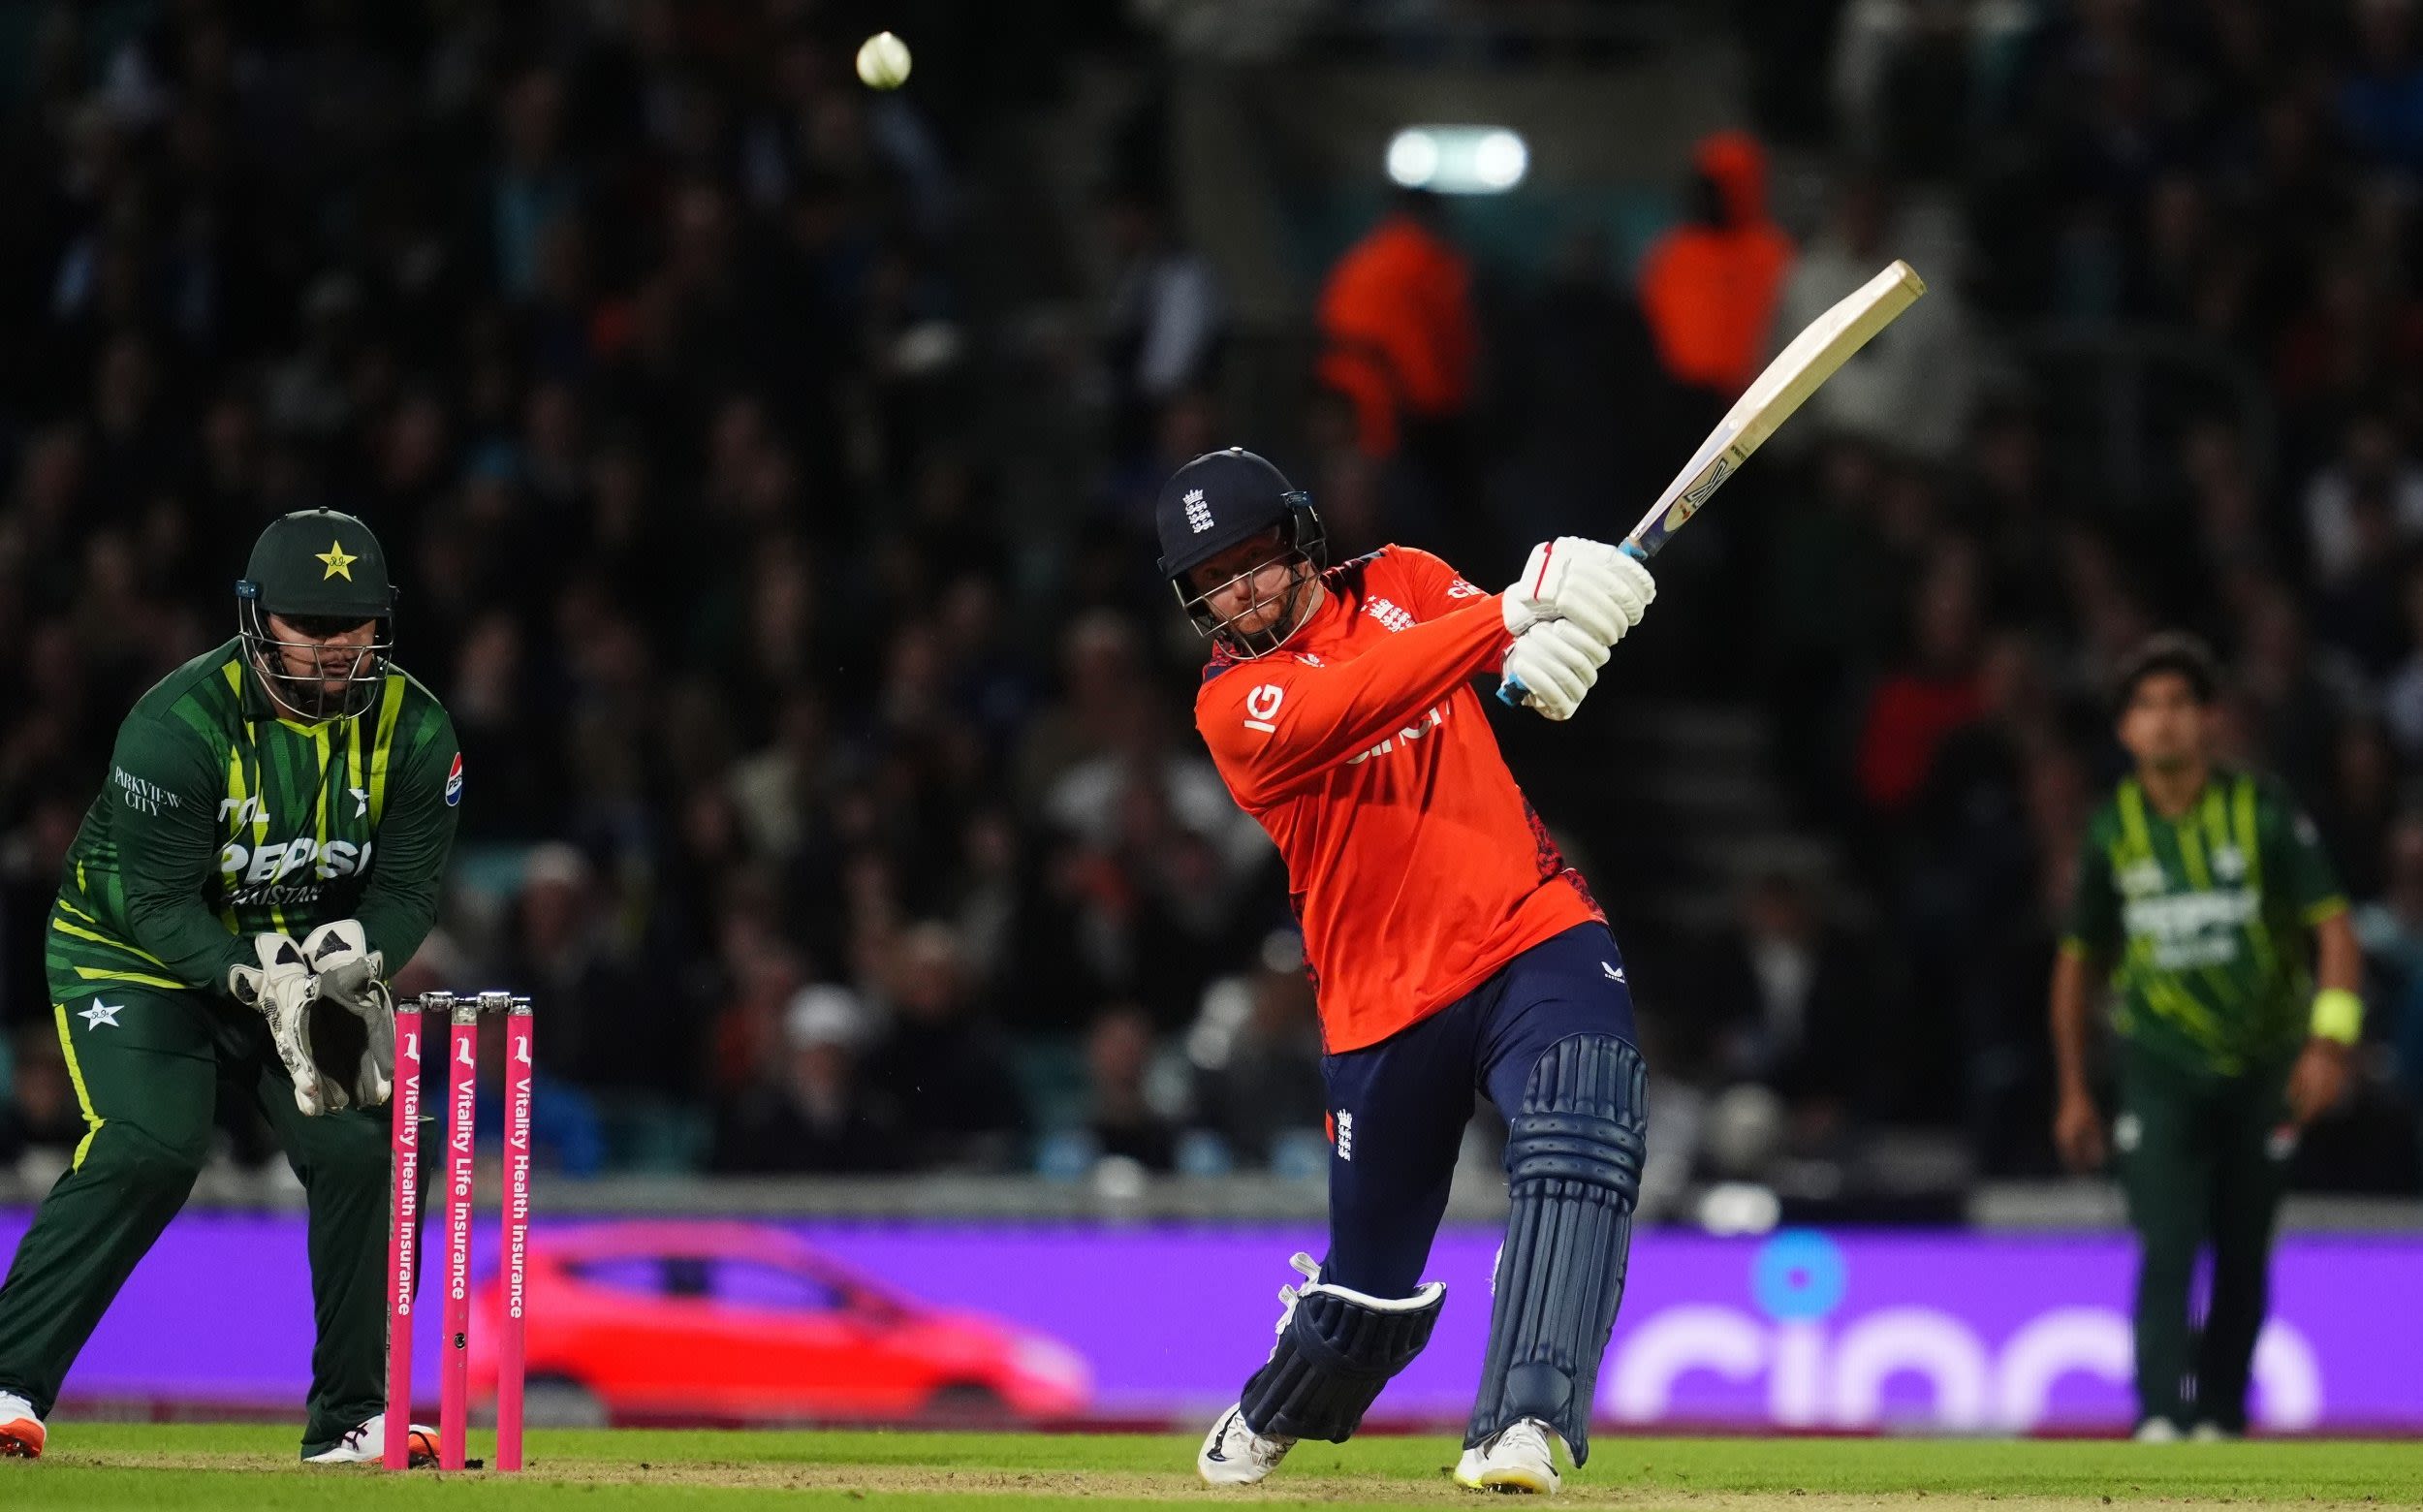 England send warning shot ahead of T20 World Cup – their swagger is back